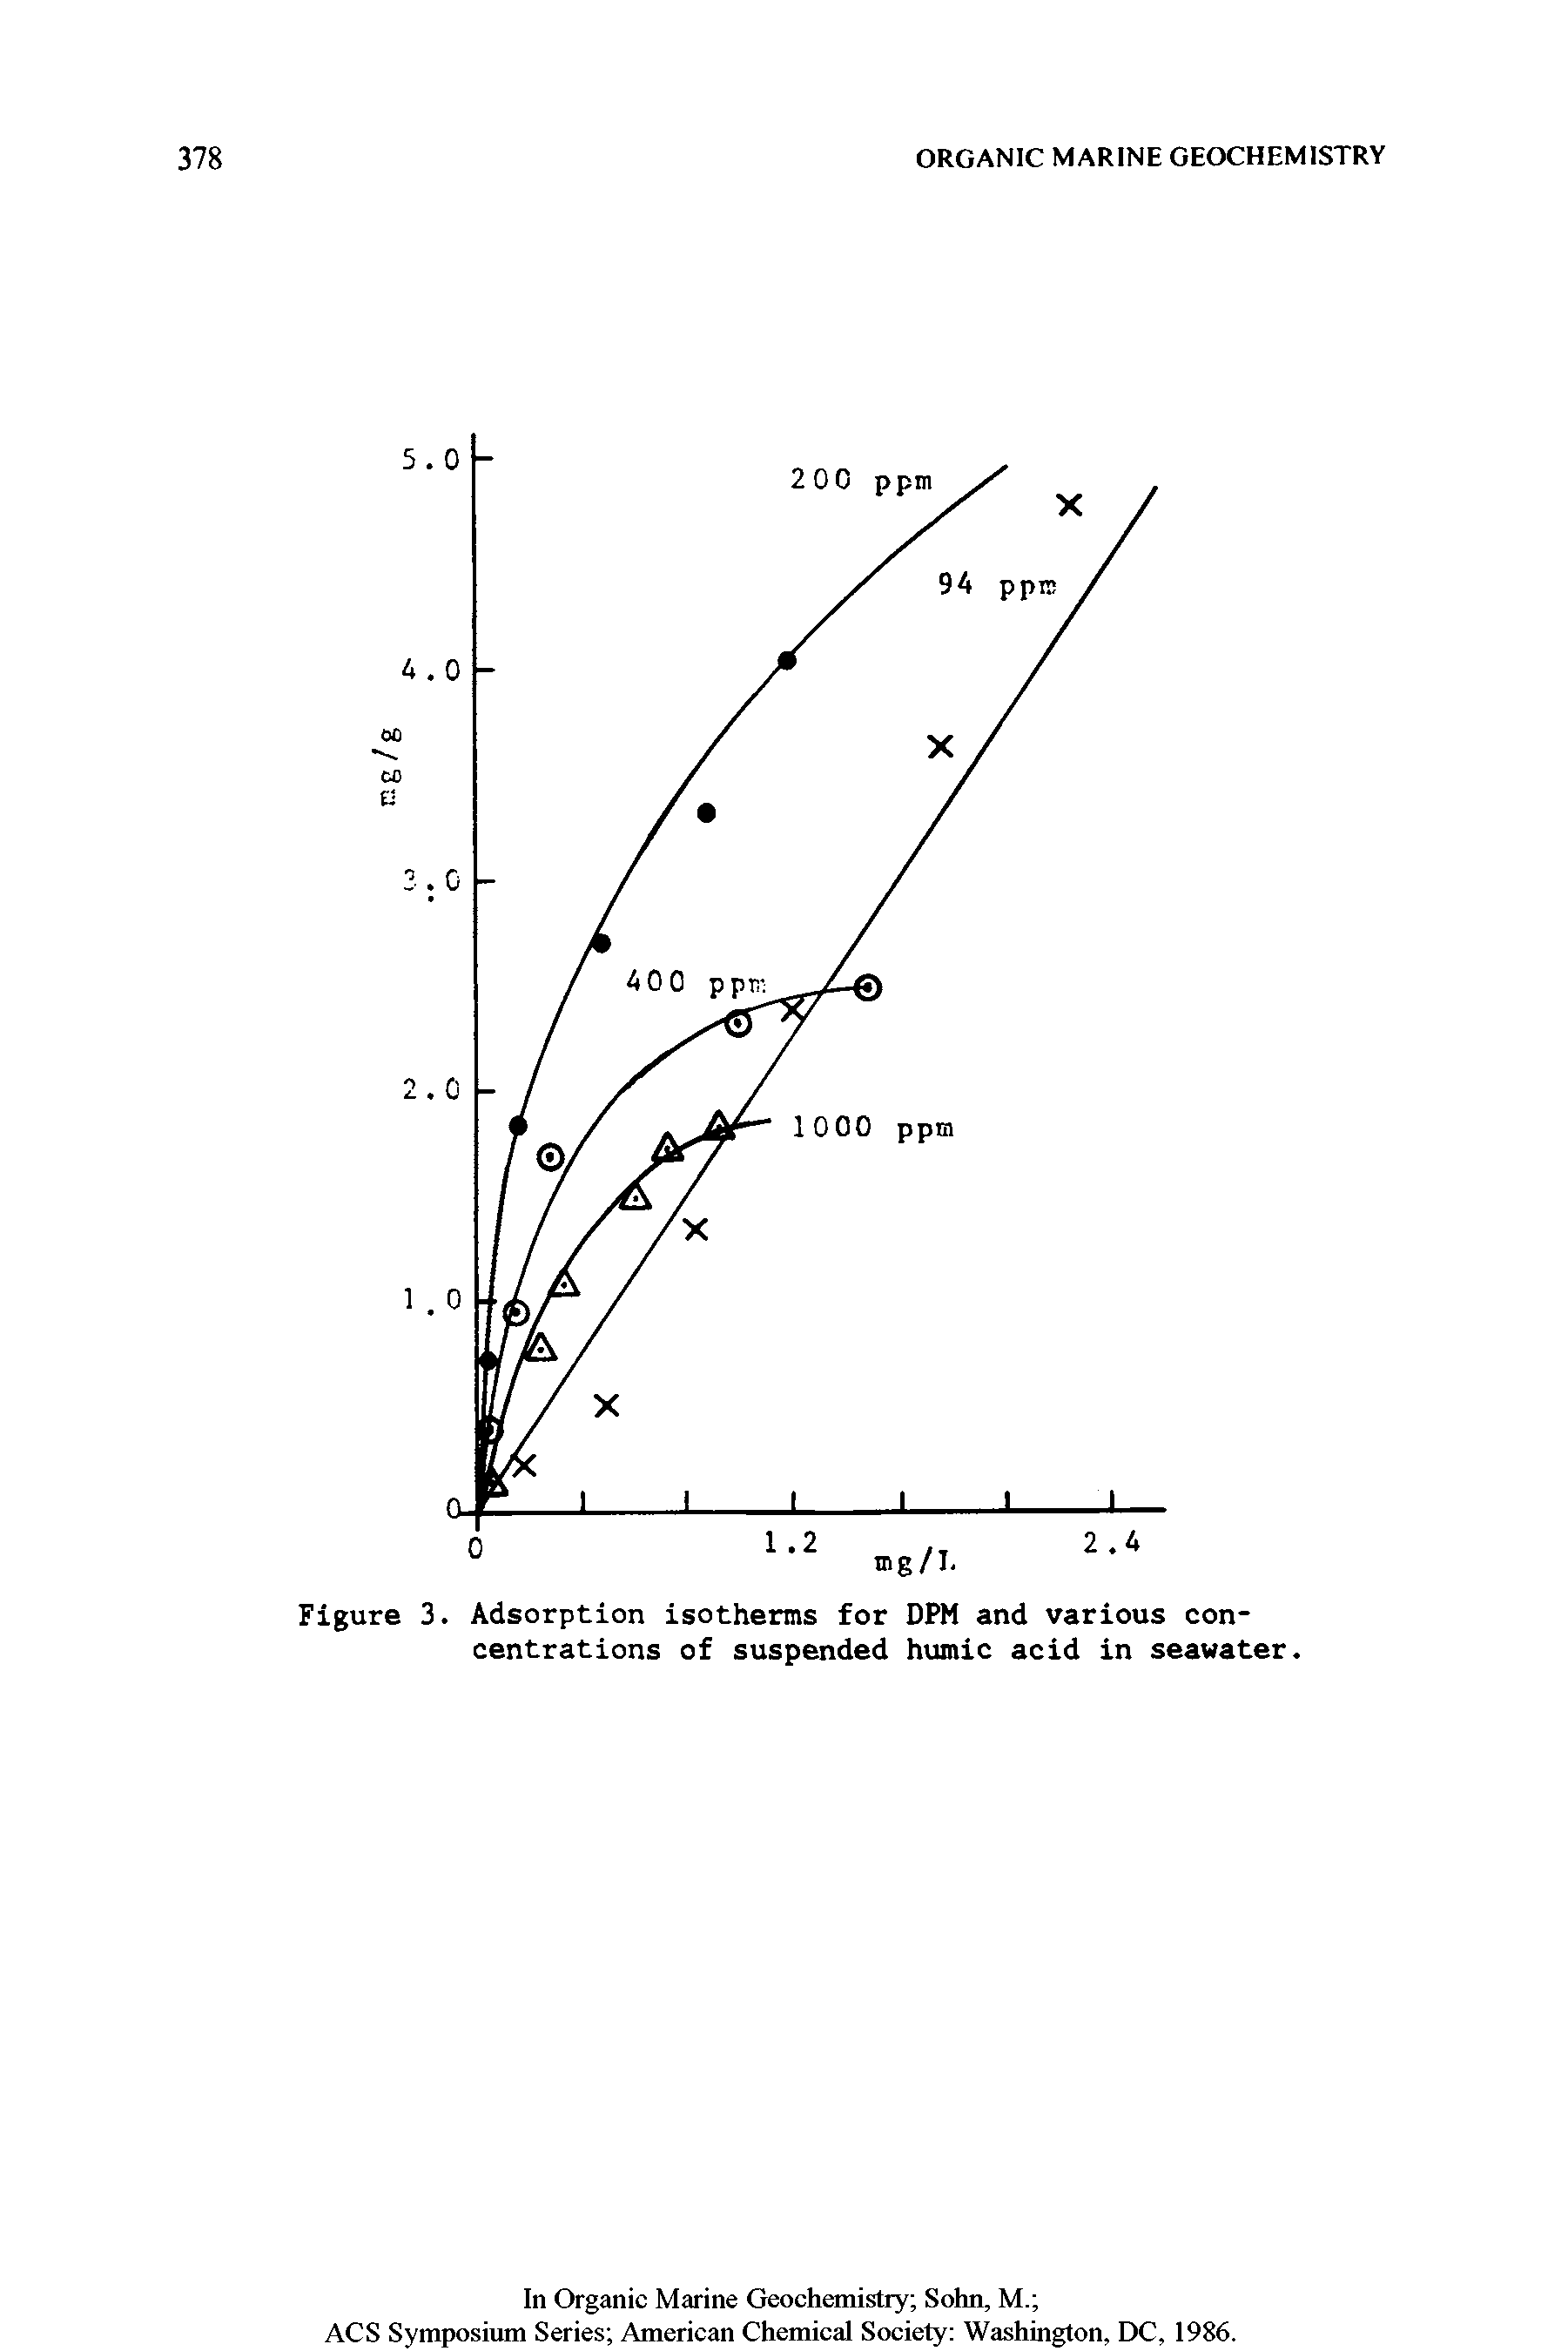 Figure 3. Adsorption isotherms for DPM and various concentrations of suspended humic acid in seawater.